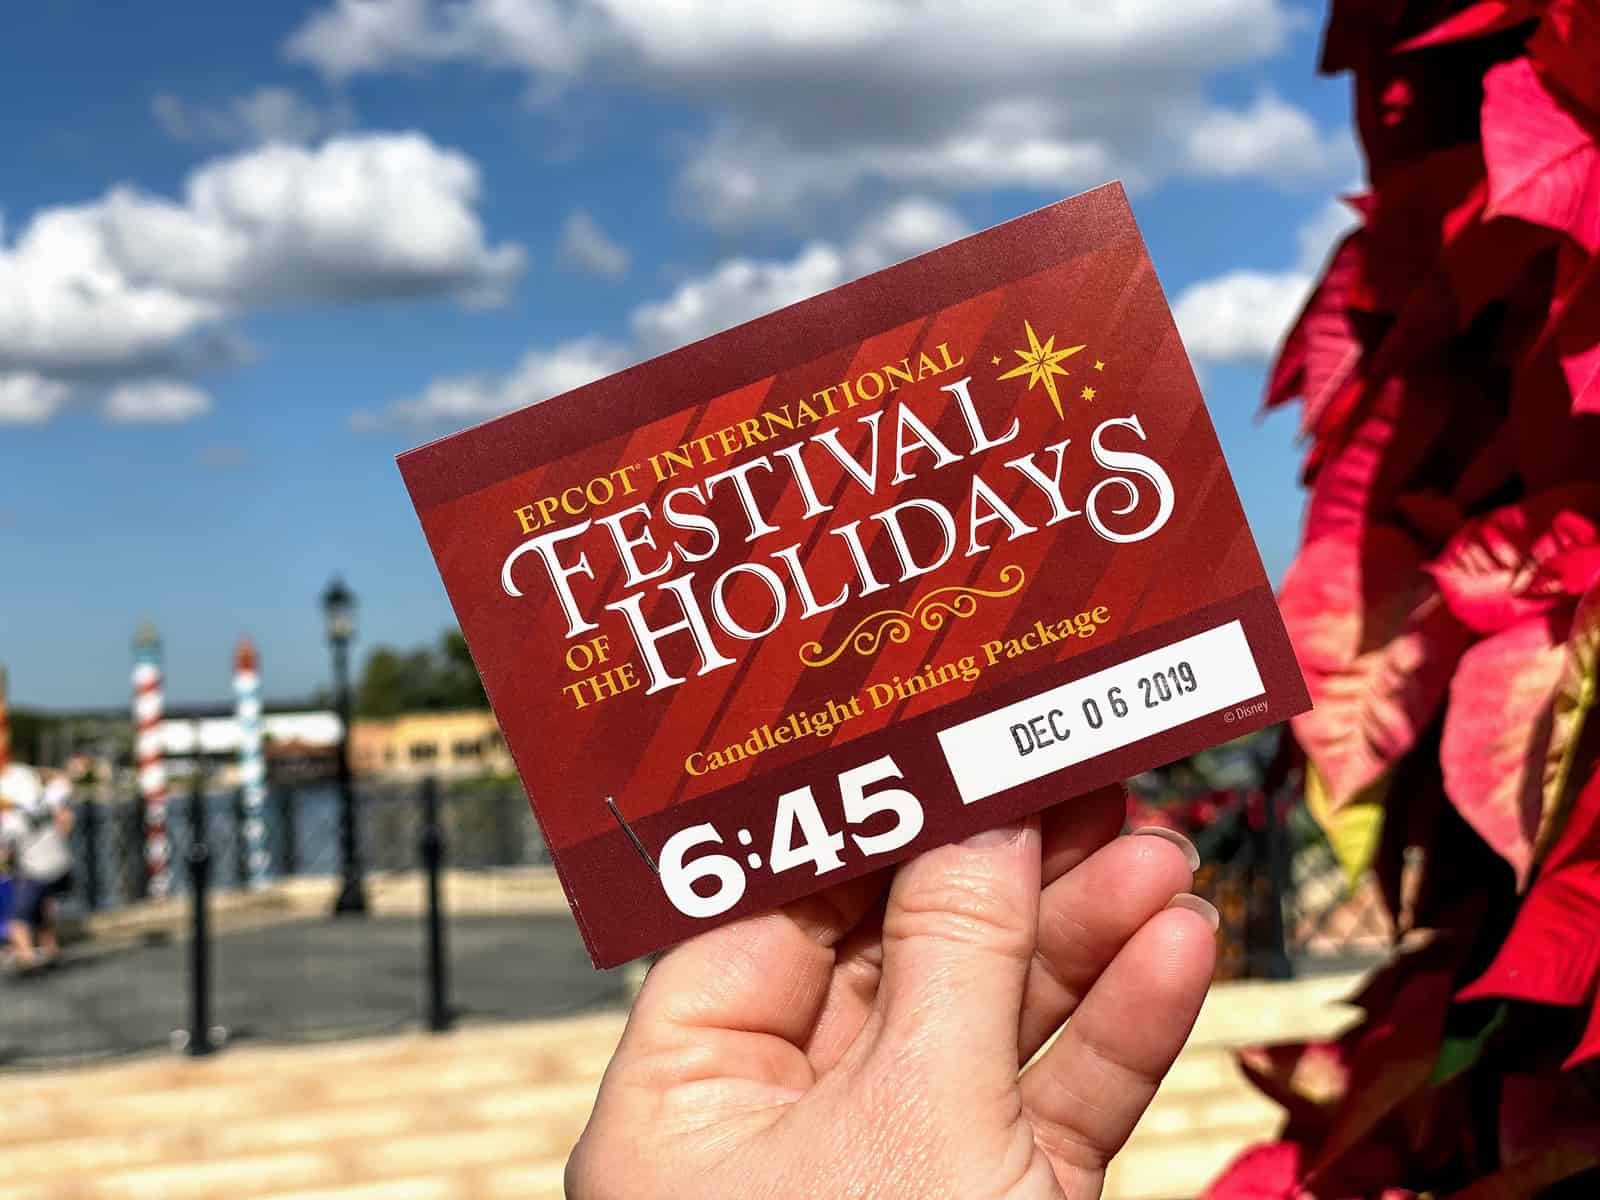 Festival of the Holidays sticker